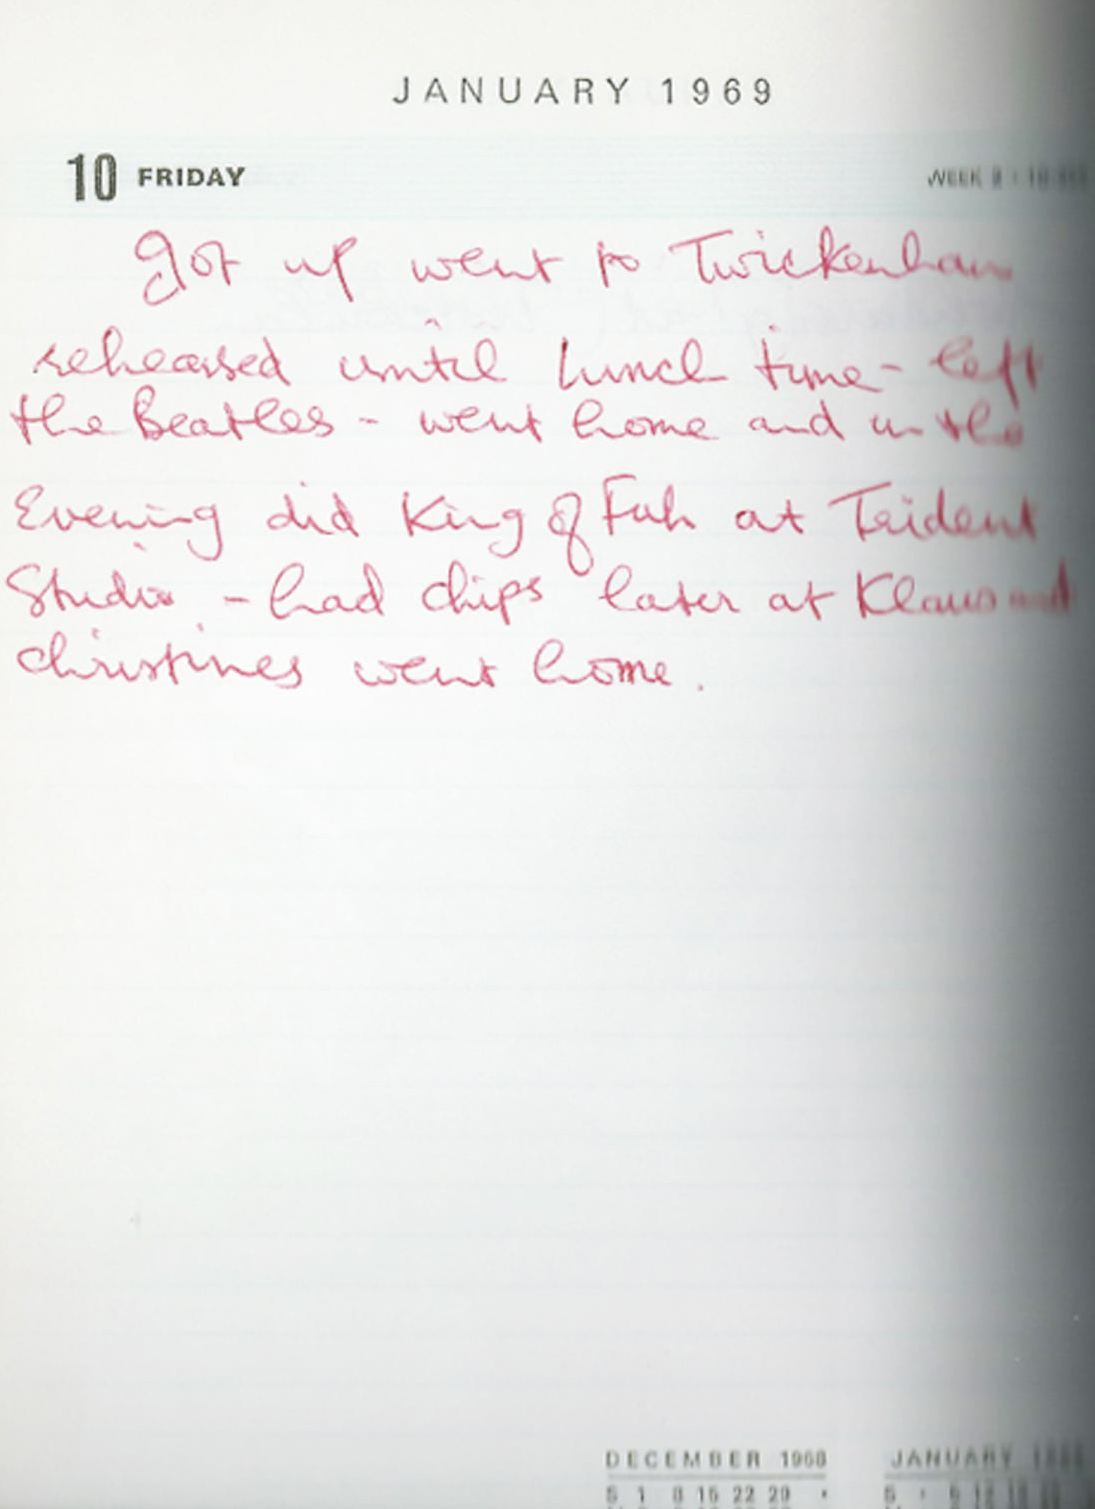 George Harrisons diary entry for the day he left The Beatles